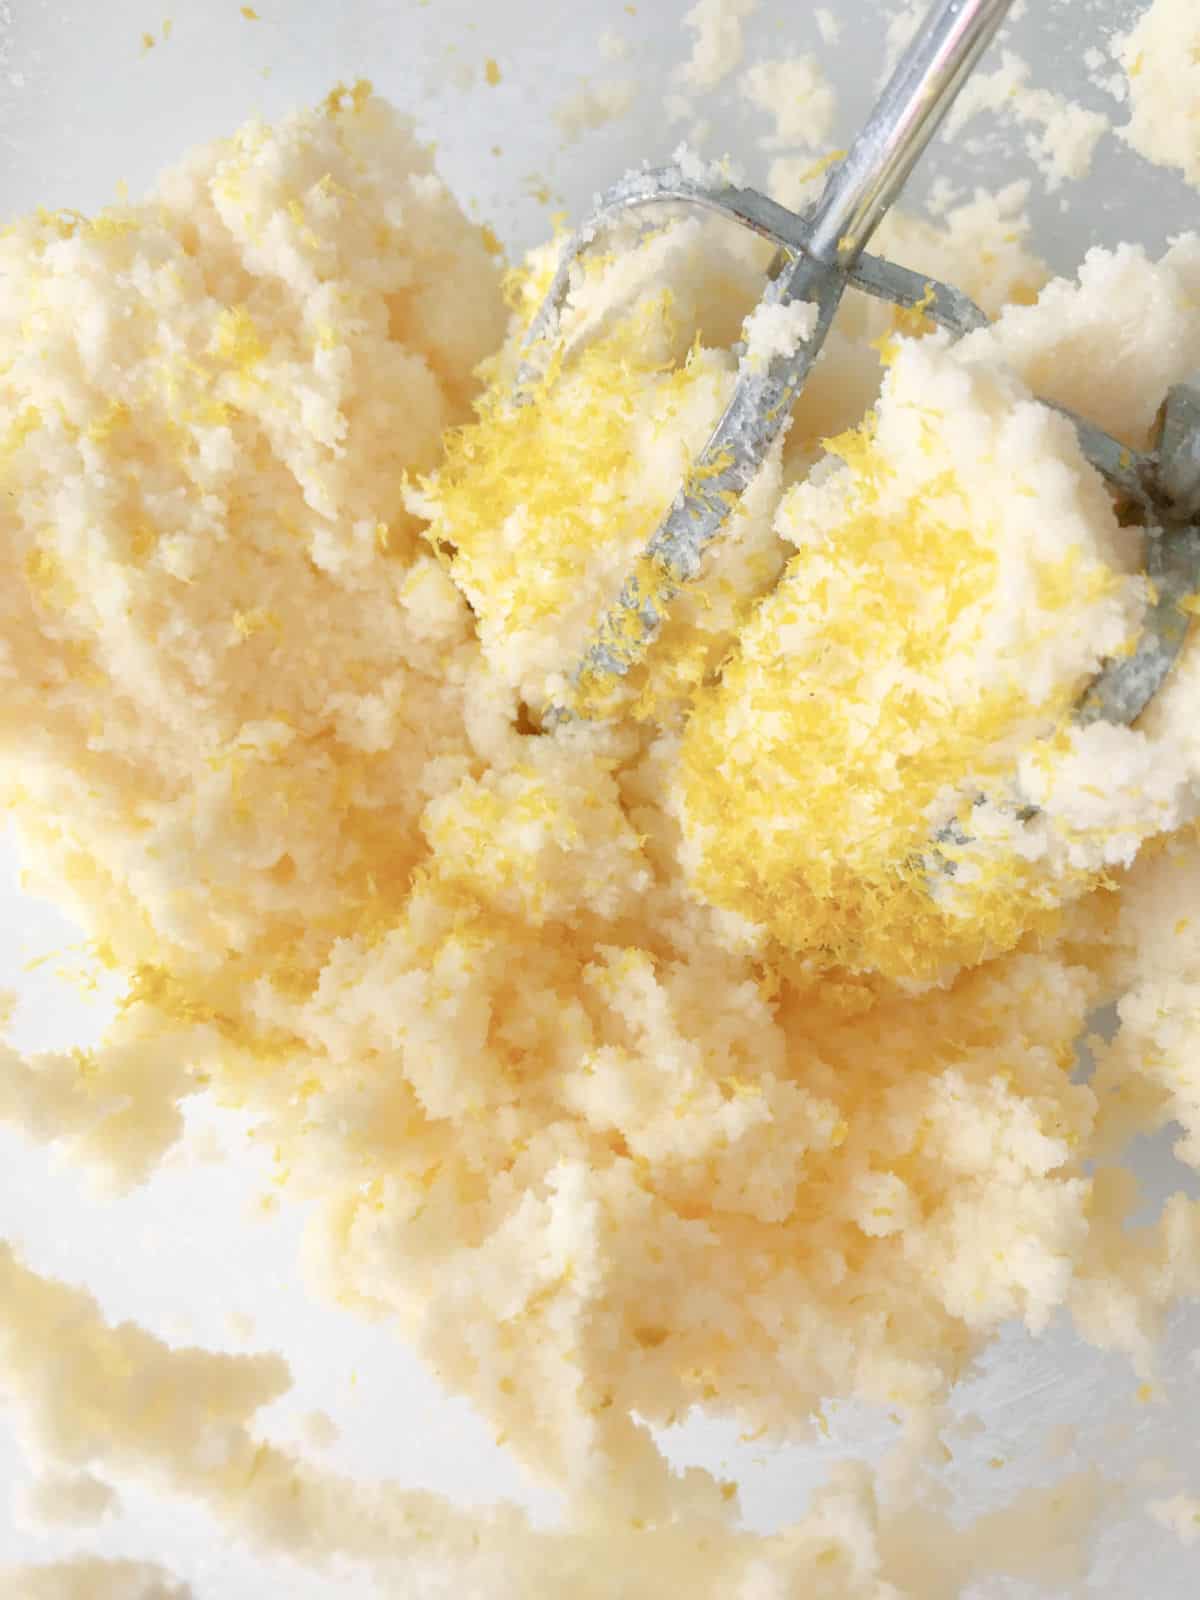 Lemon zest added to butter cake batter in bowl with metal beaters. Close up image.